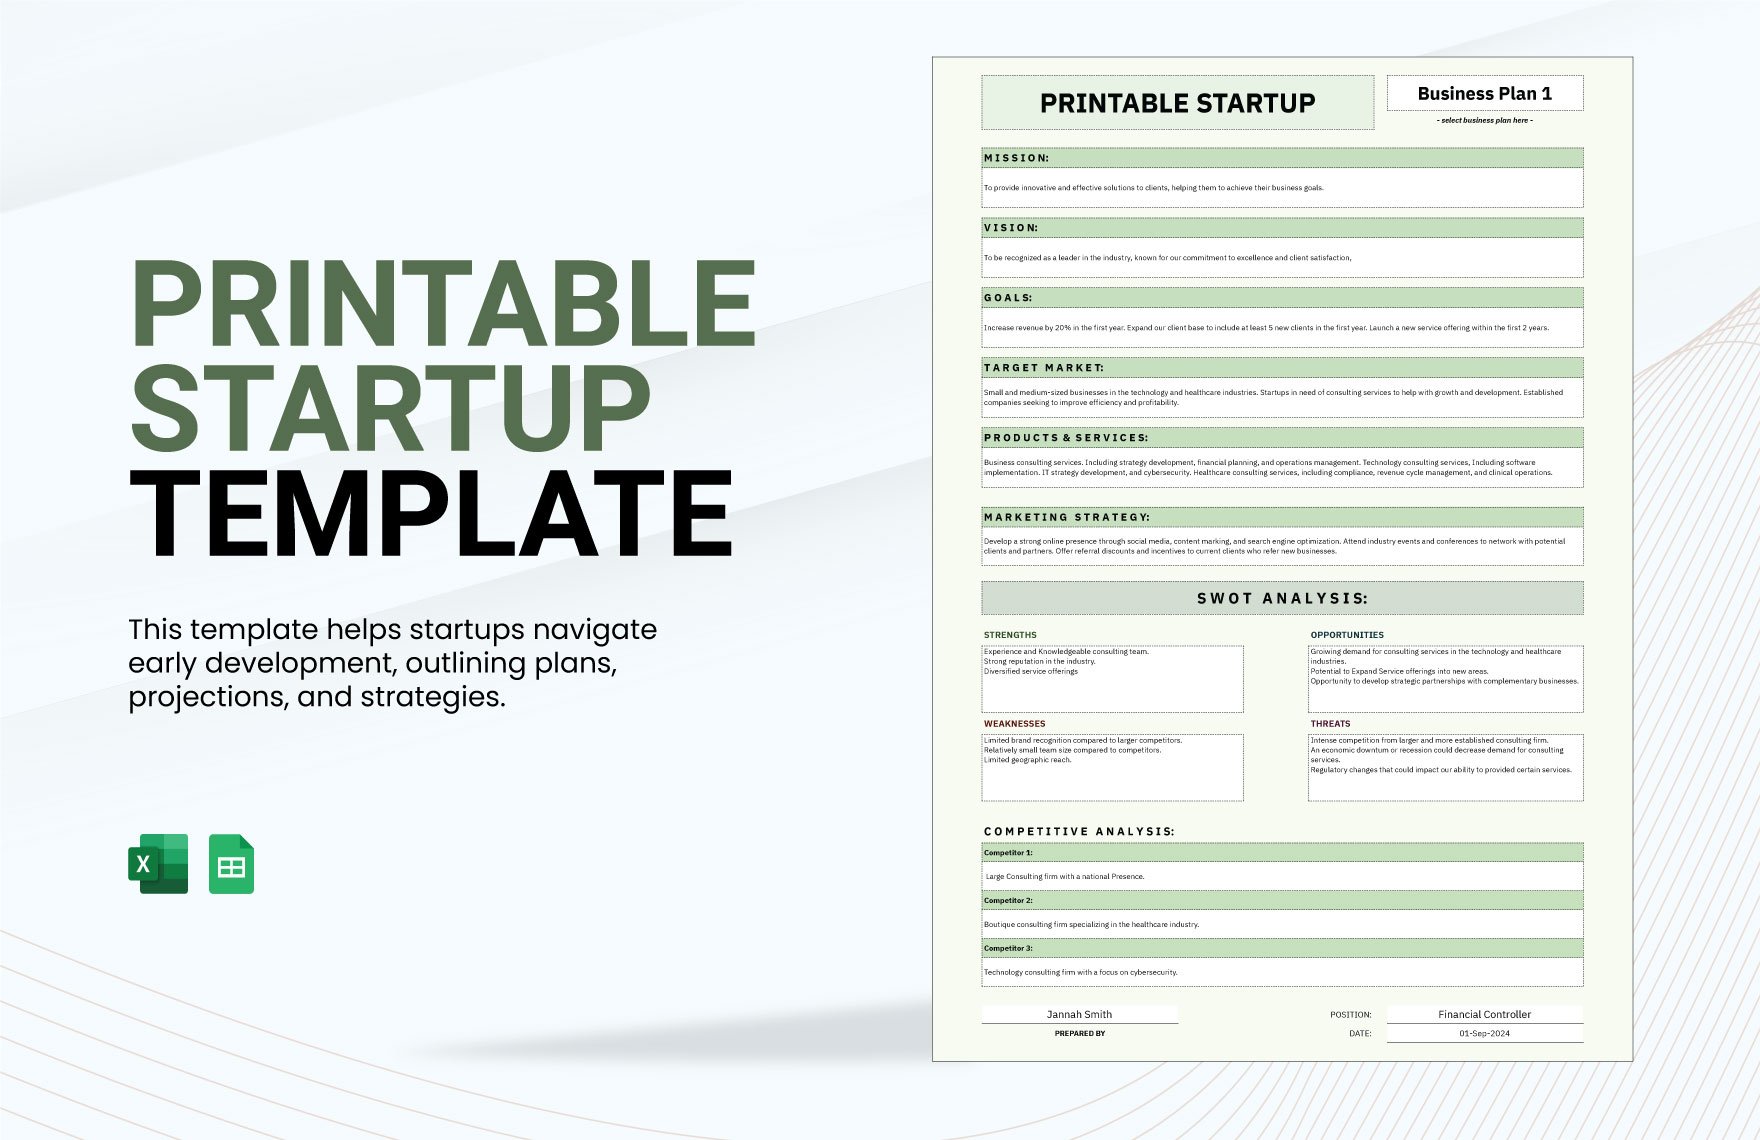 Printable Startup Template in Excel, Google Sheets